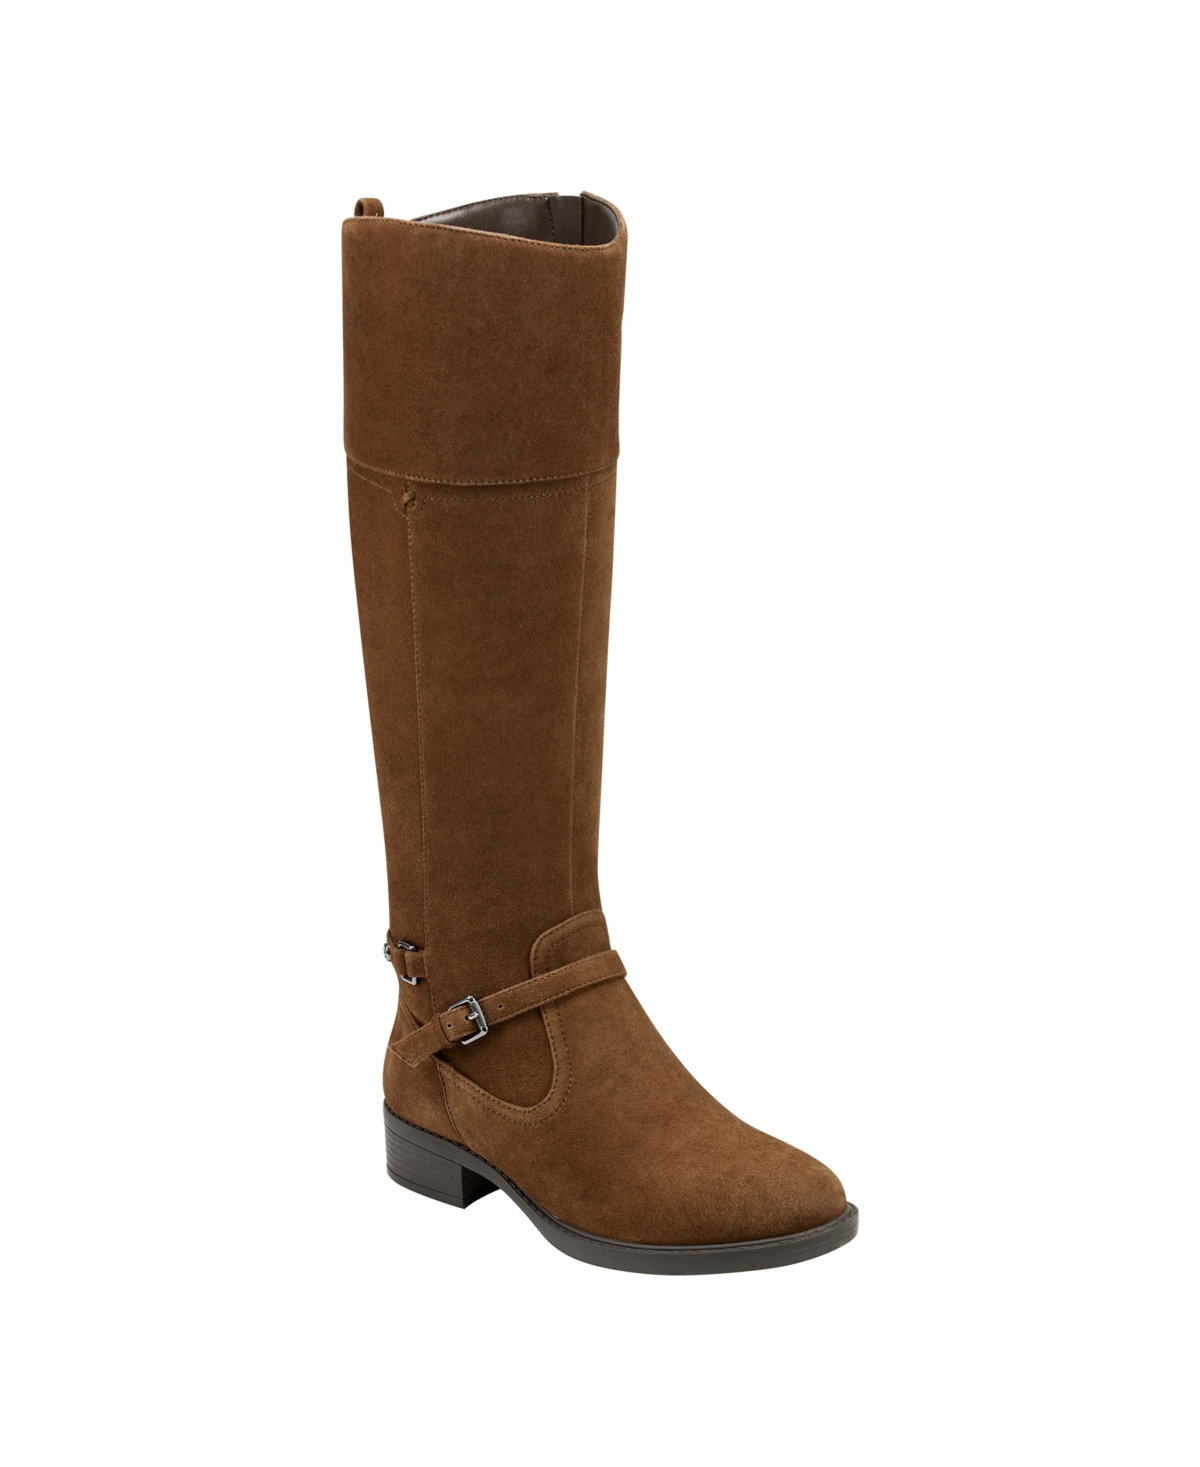 Leigh Riding Boots - Medium Brown Suede